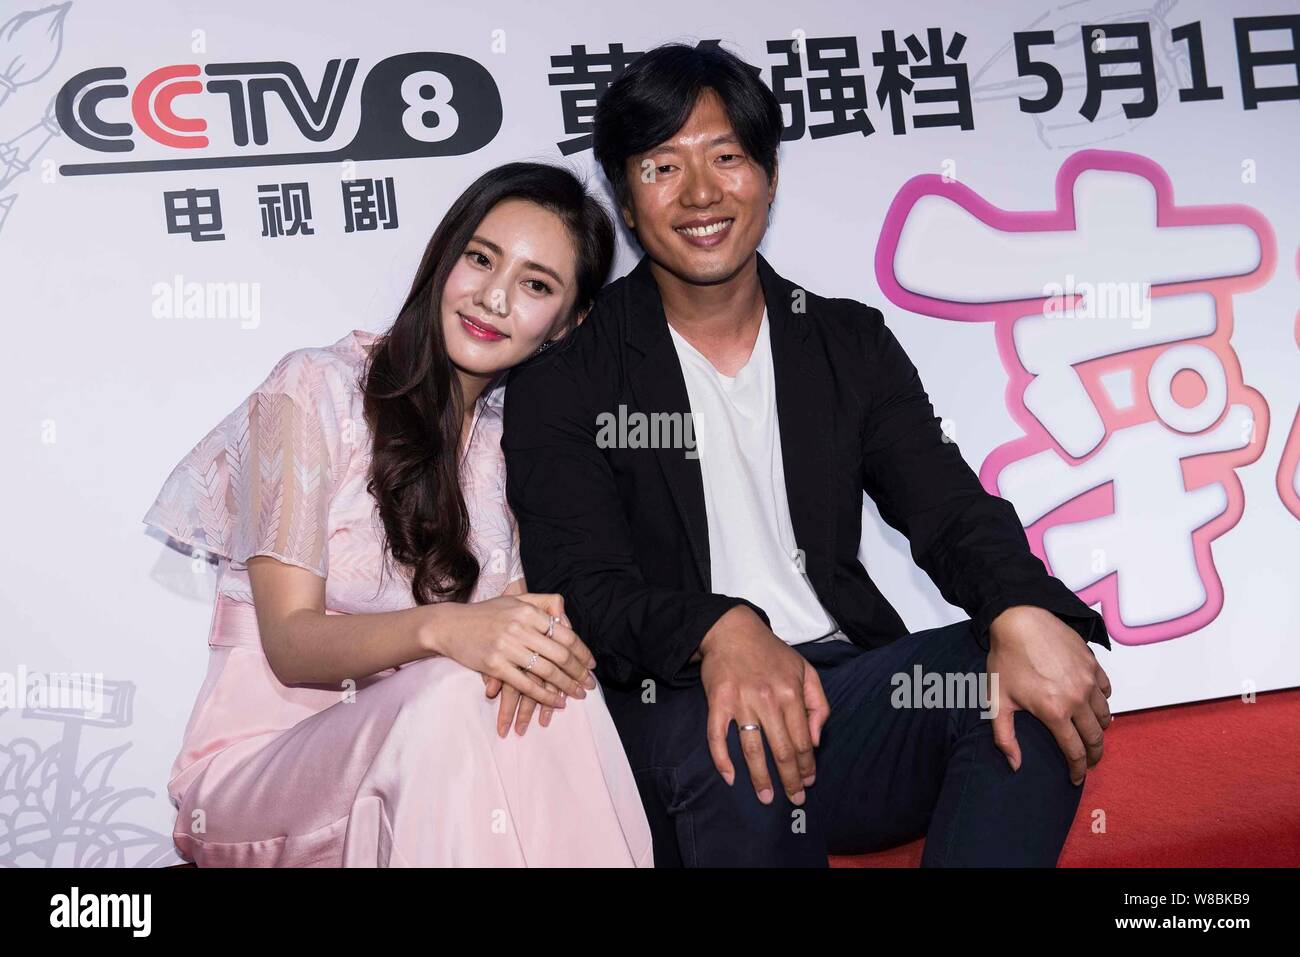 South Korean Actress Choo Ja-Hyun, Left, And Chinese Actor Ling Xiaosu  Attend A Press Conference To Promote Their New Tv Drama 